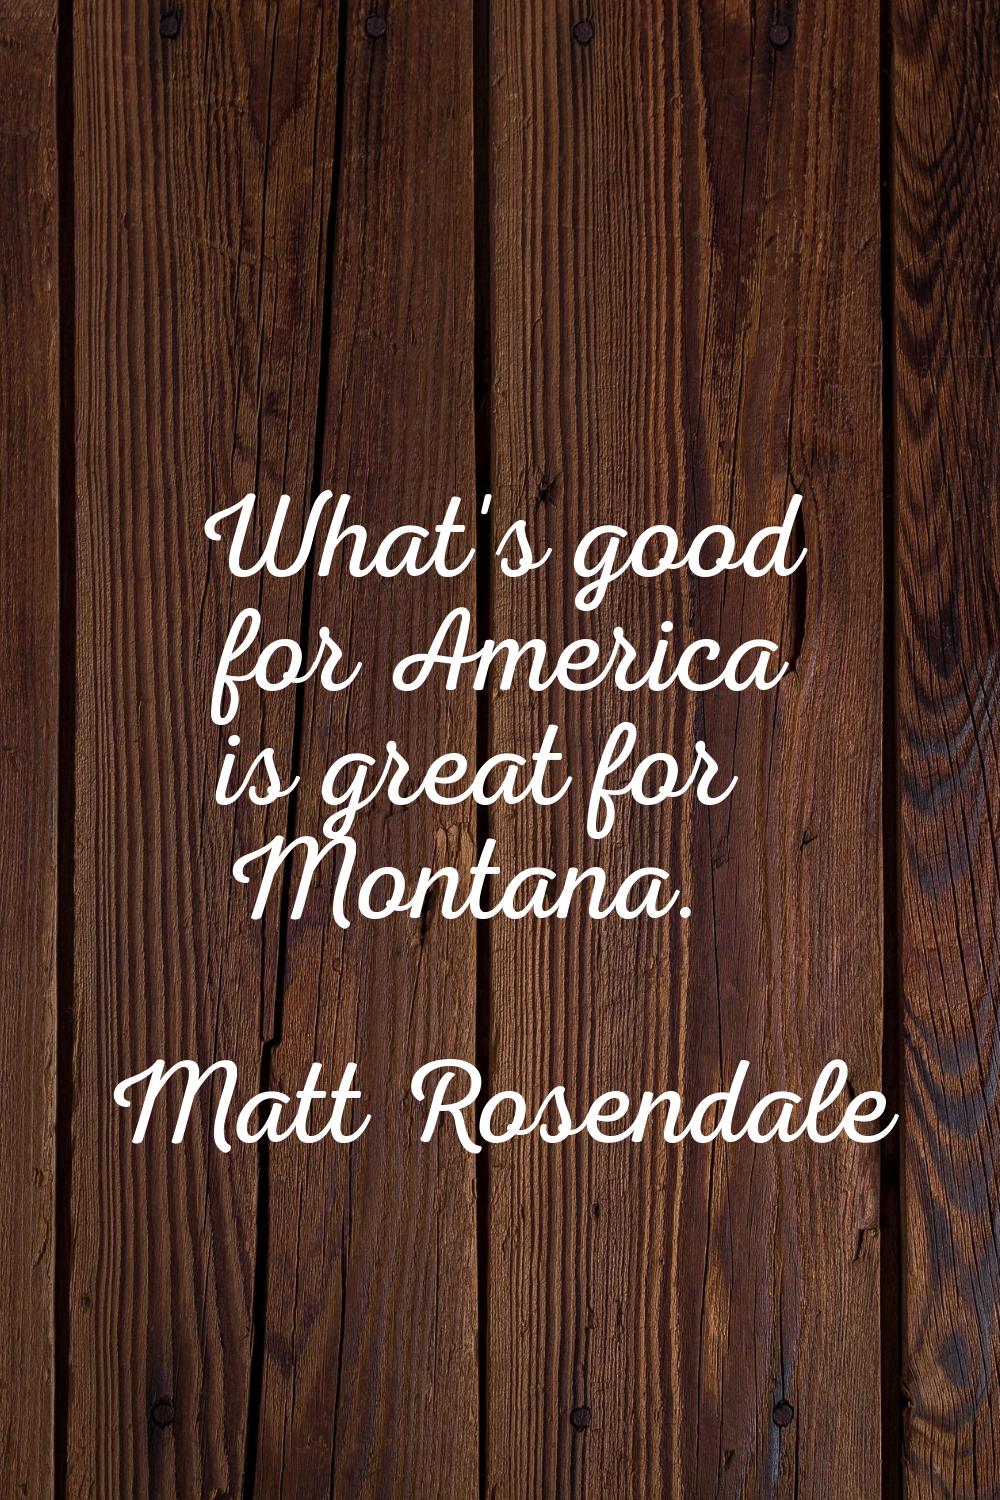 What's good for America is great for Montana.